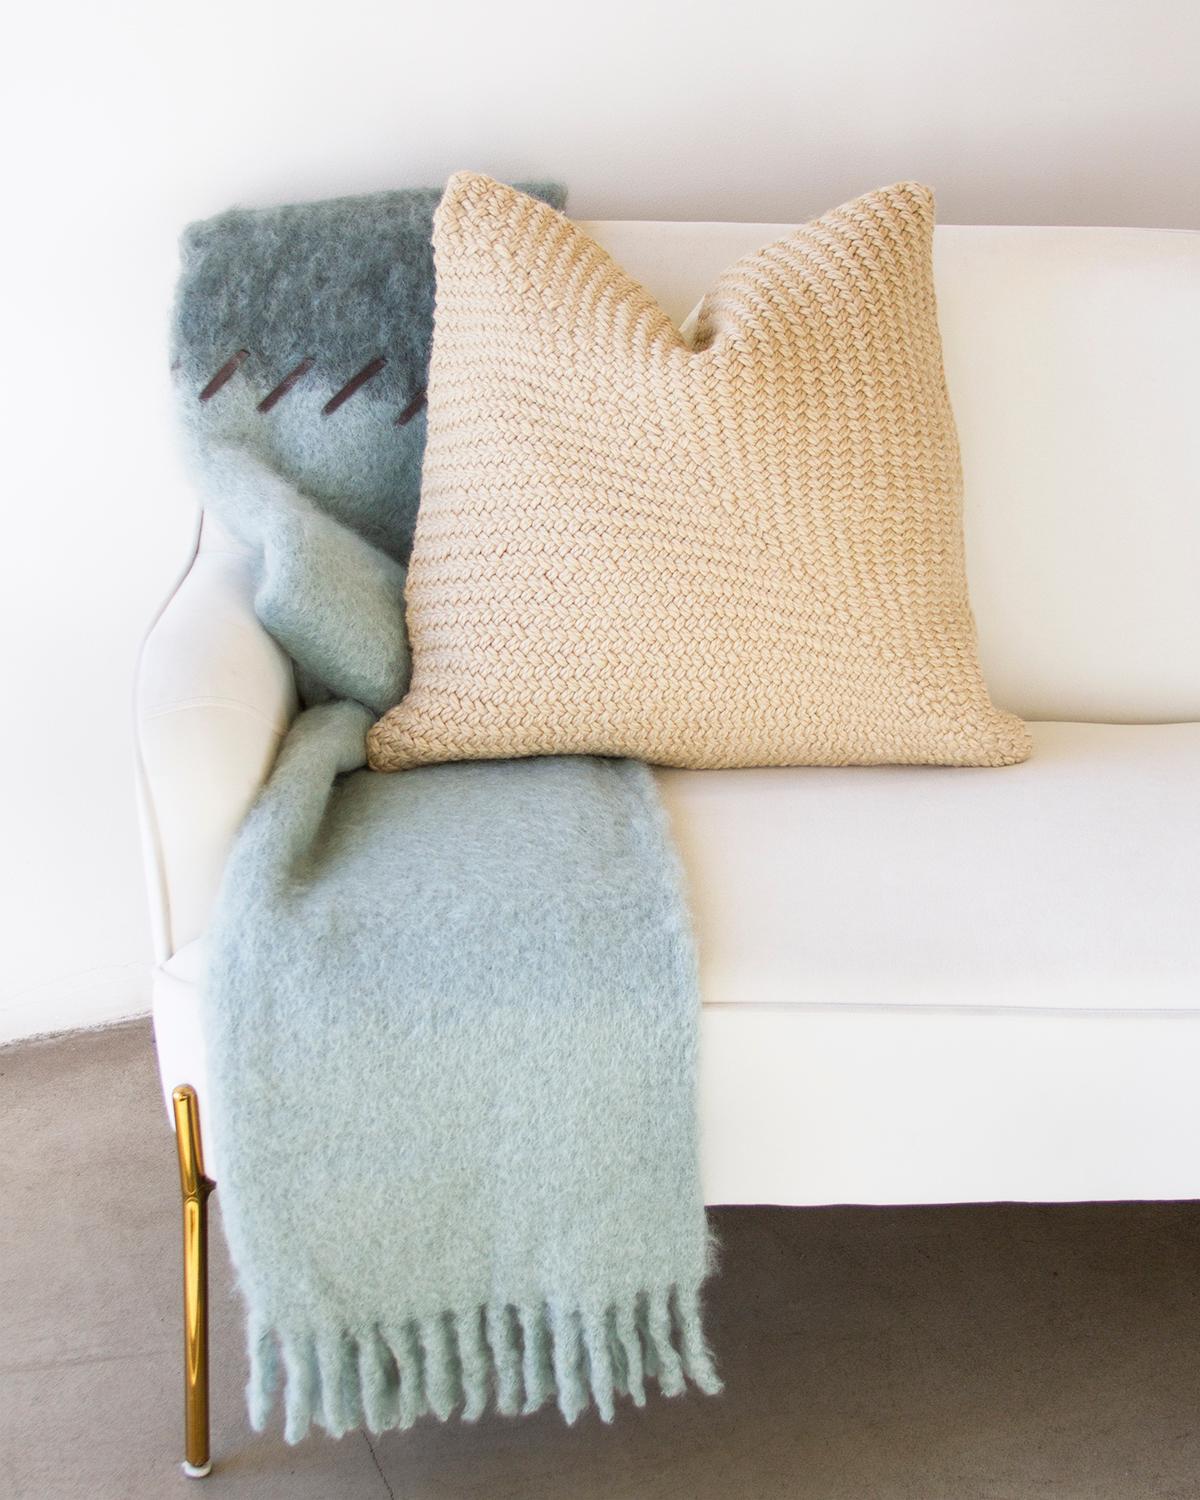 This cozy and warm Marina and Seafoam Mohair Throw is perfect for home décor. The soft and fuzzy mohair features a color block with blue-green and light aqua hues, designed to add a chic touch to any bedroom or living room. The suede whipstitch